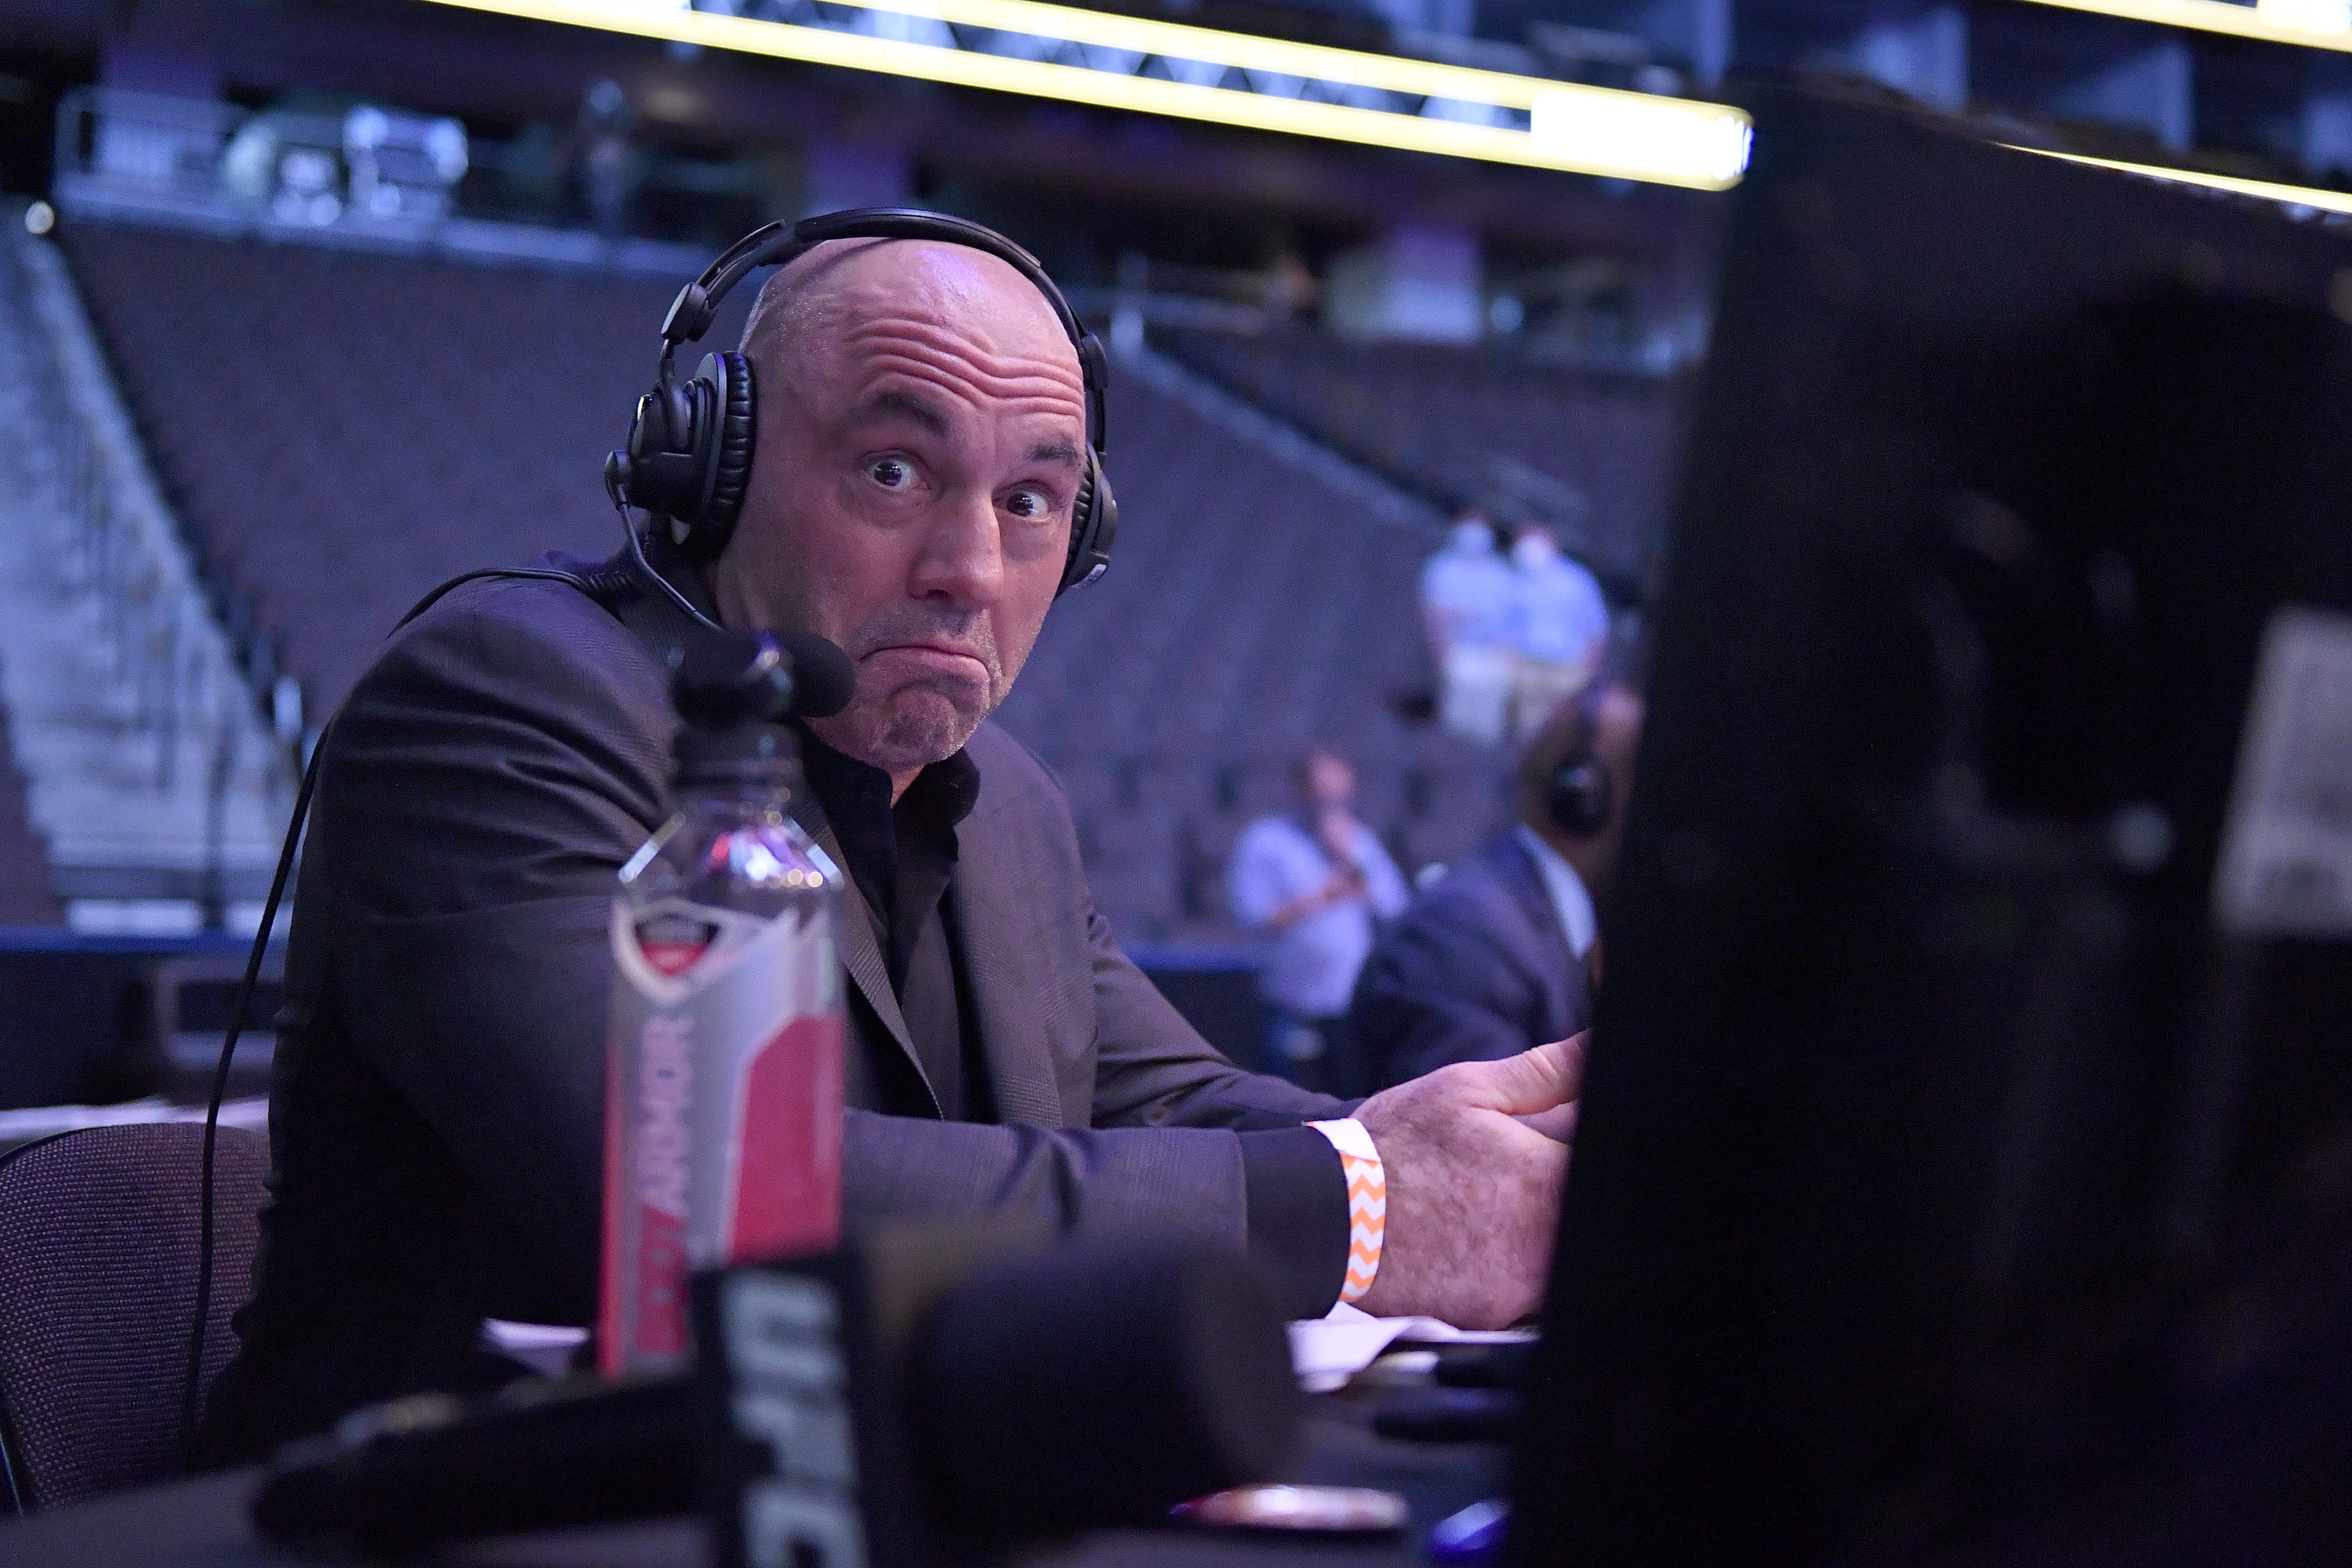 Joe Rogan wearing a headset and looking into the camera